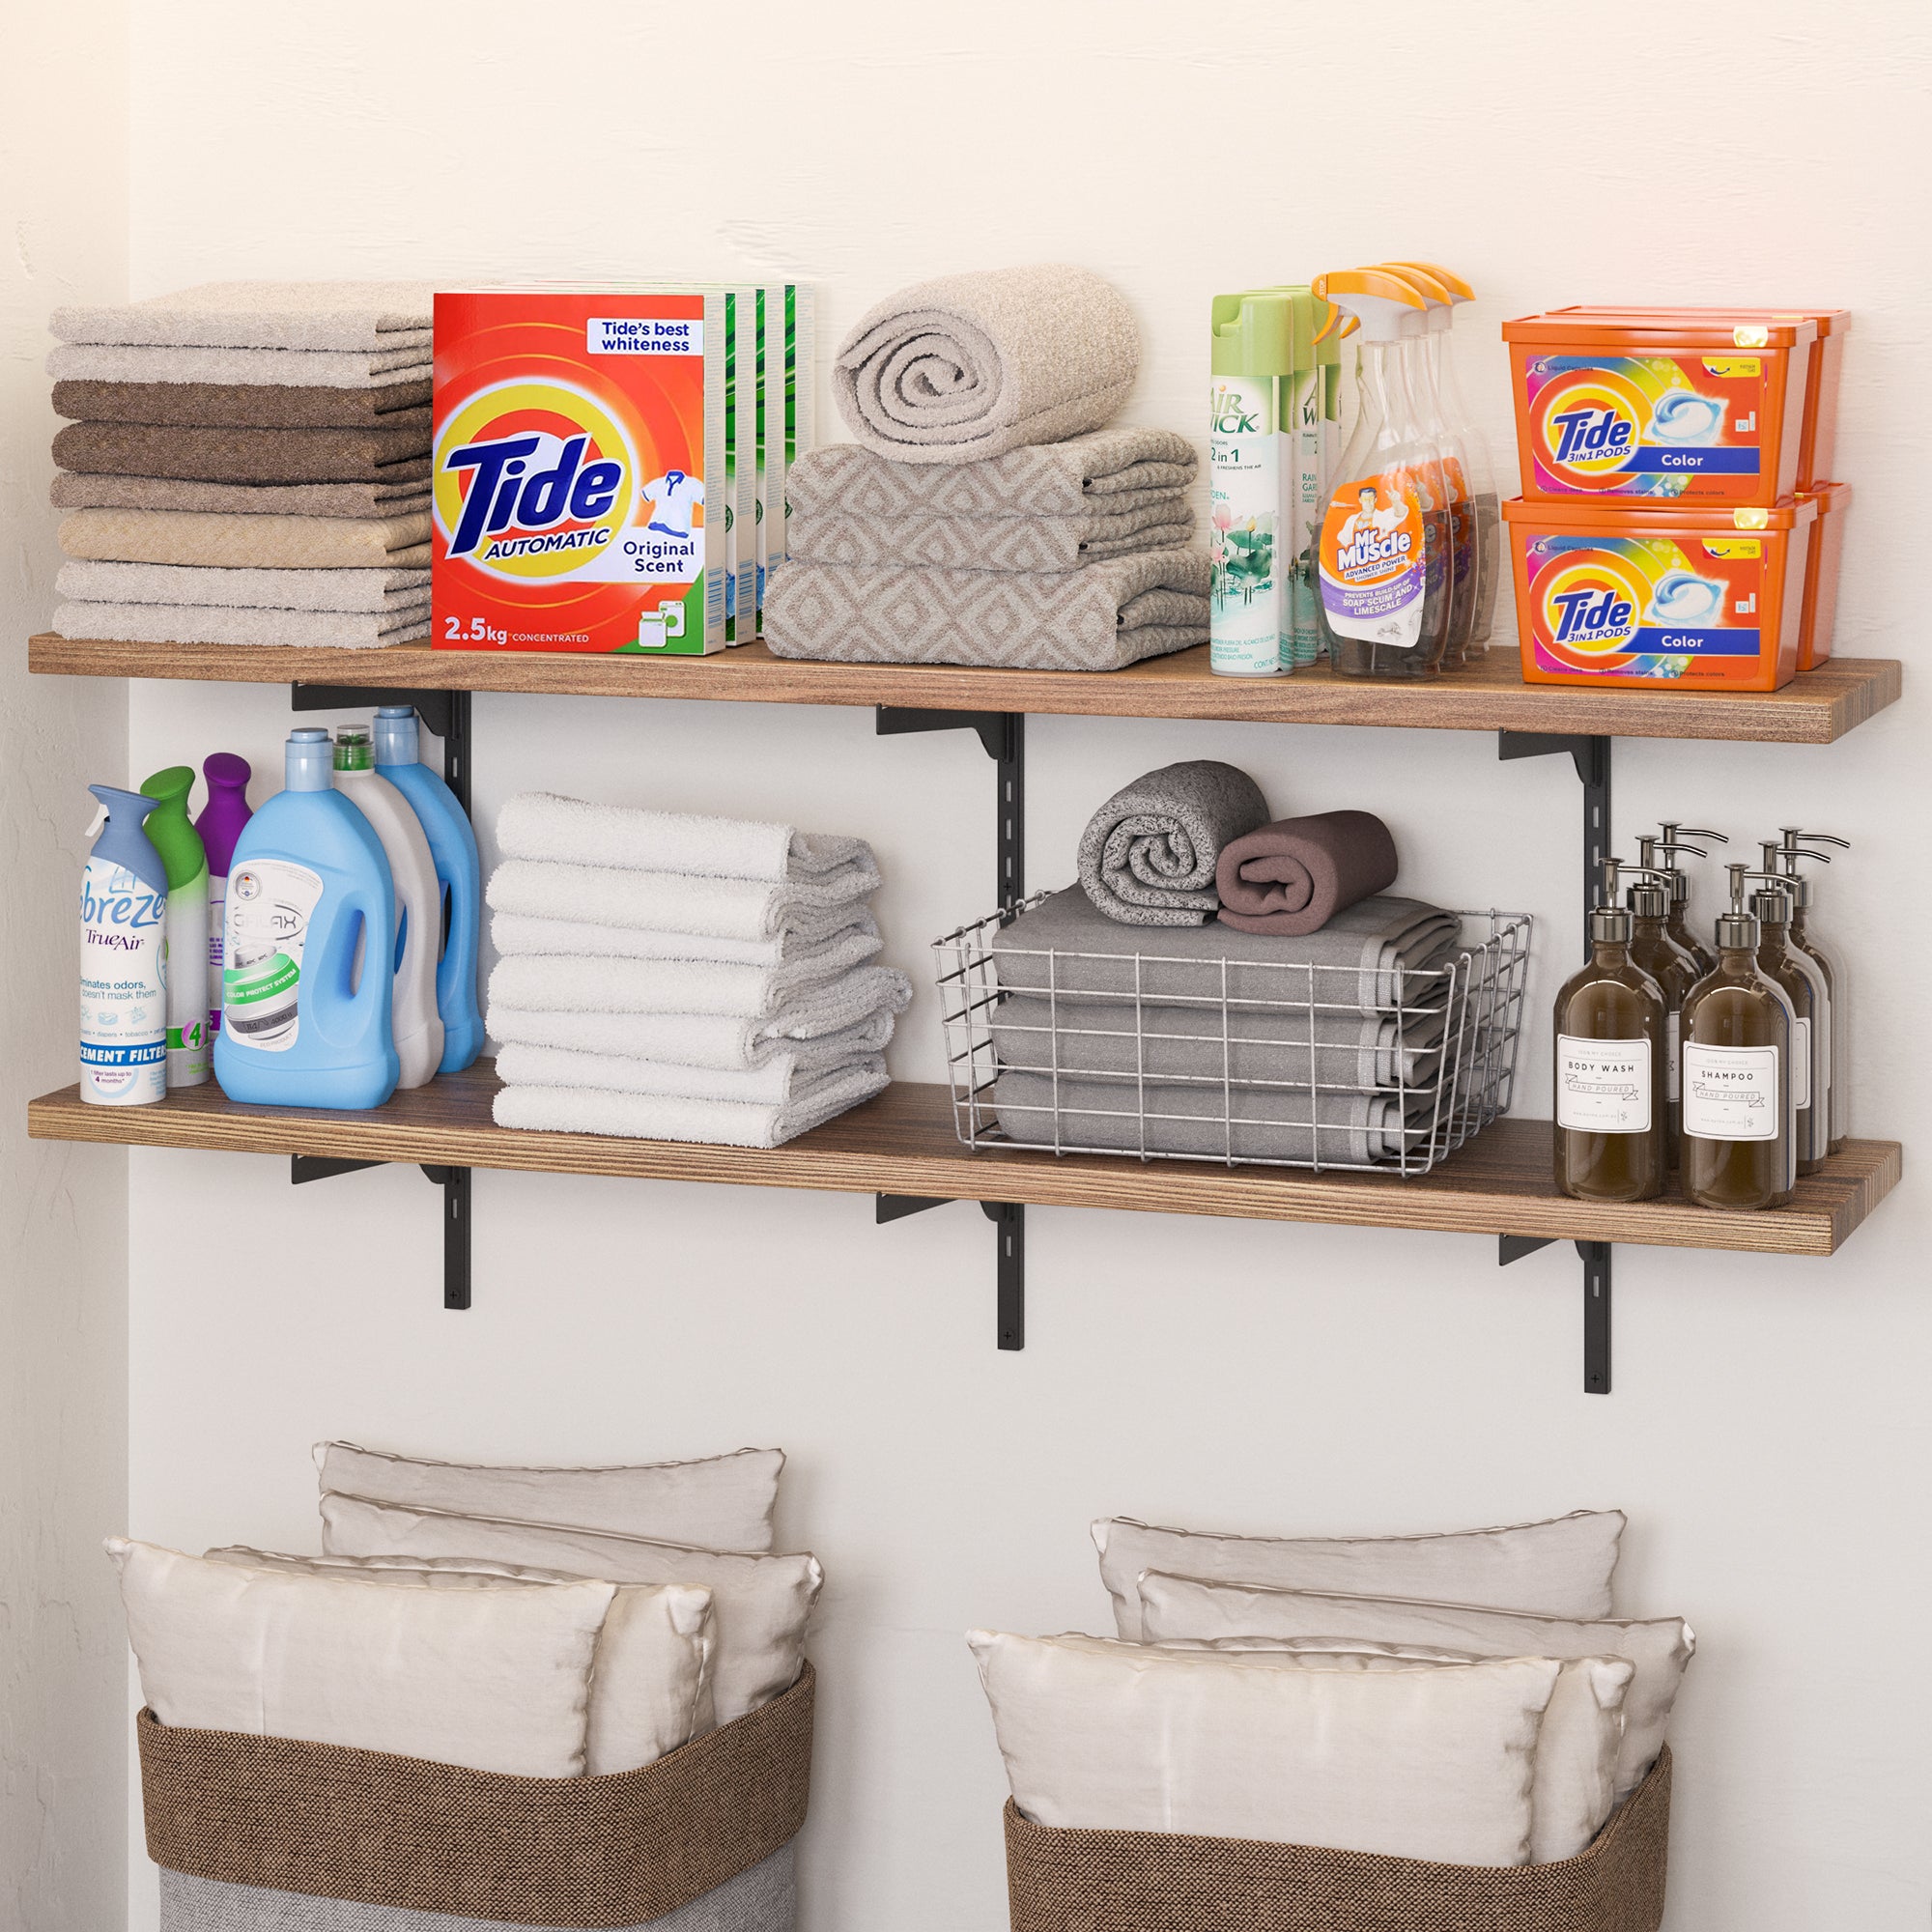 Laundry room shelves burnt neatly stocked with towels, detergents, and a wire basket.